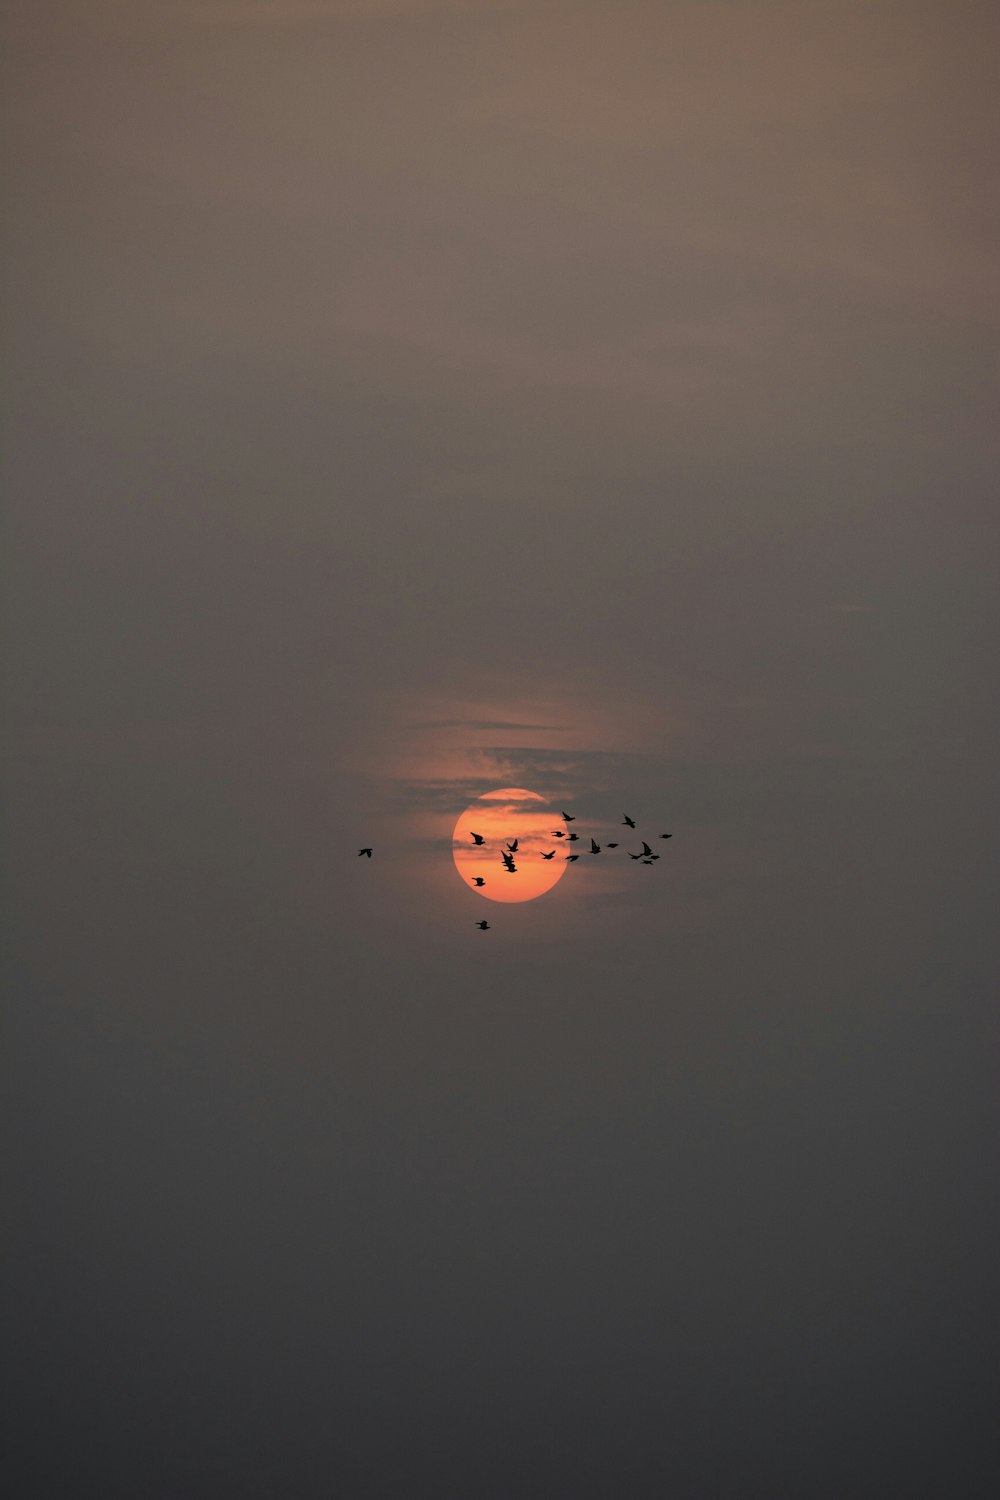 a flock of birds flying in front of the sun